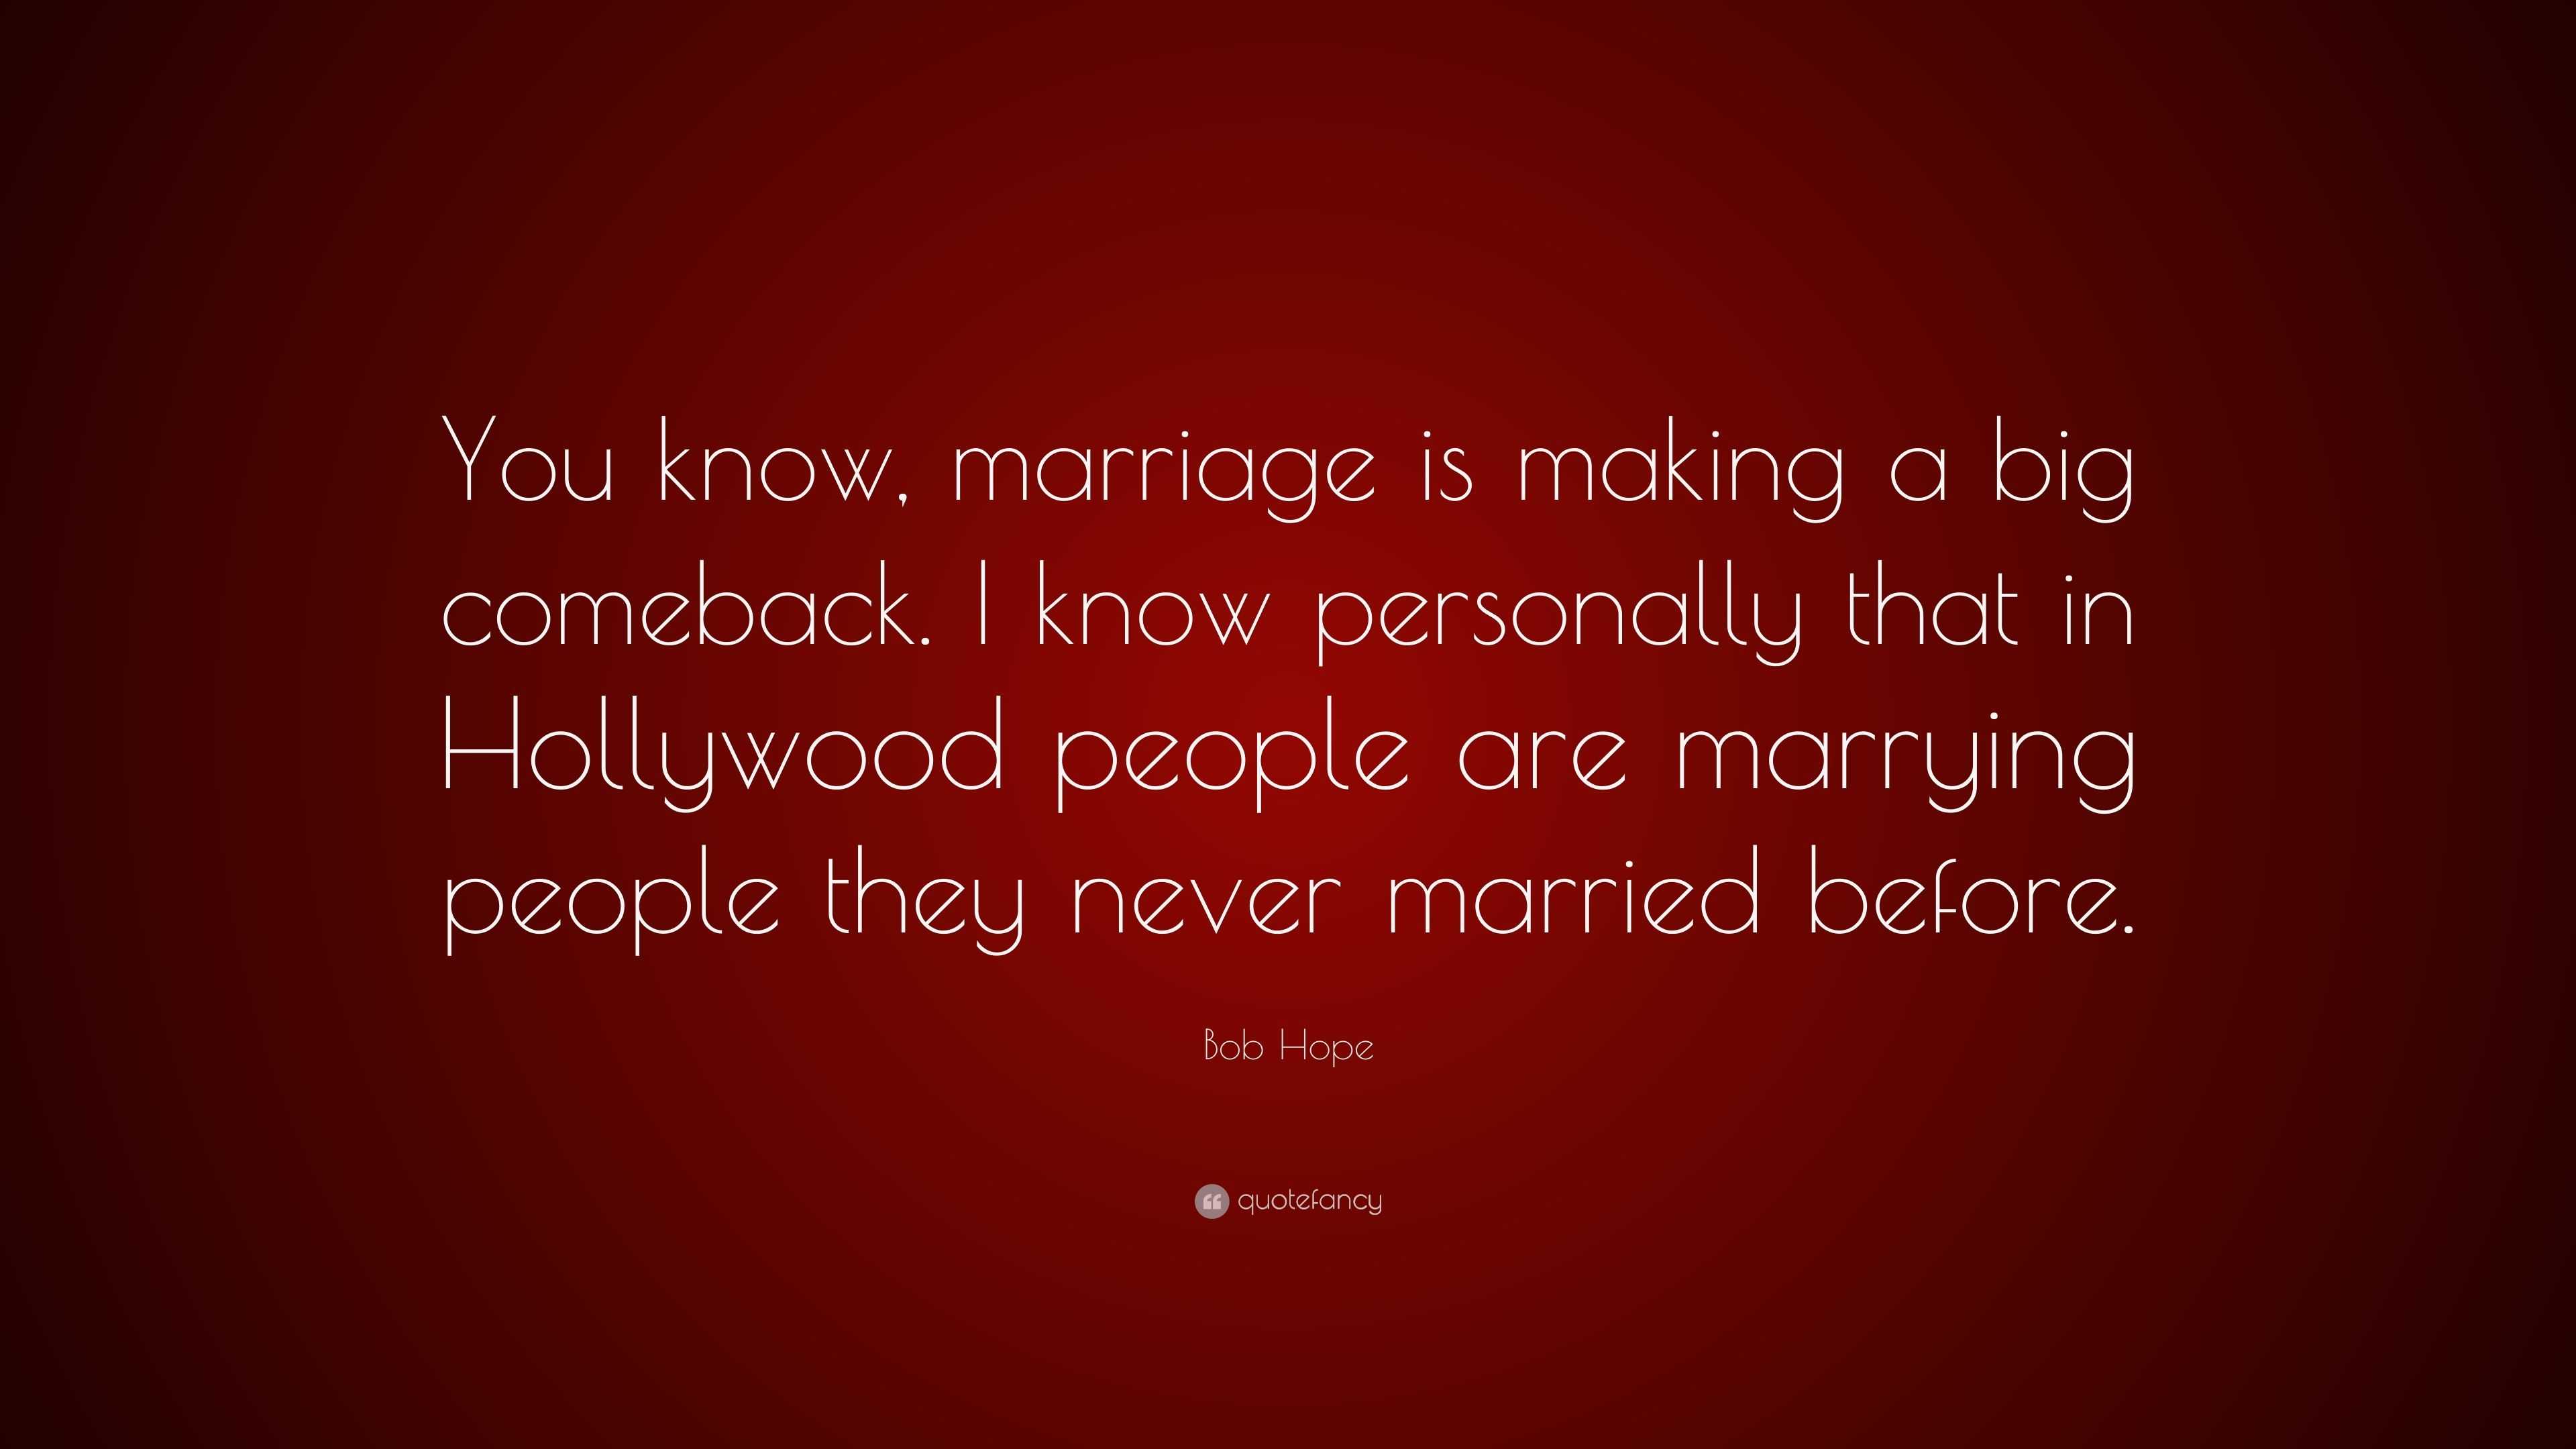 Bob Hope Quote: “You Know, Marriage Is Making A Big Comeback. I Know Personally That In Hollywood People Are Marrying People They Never M...”